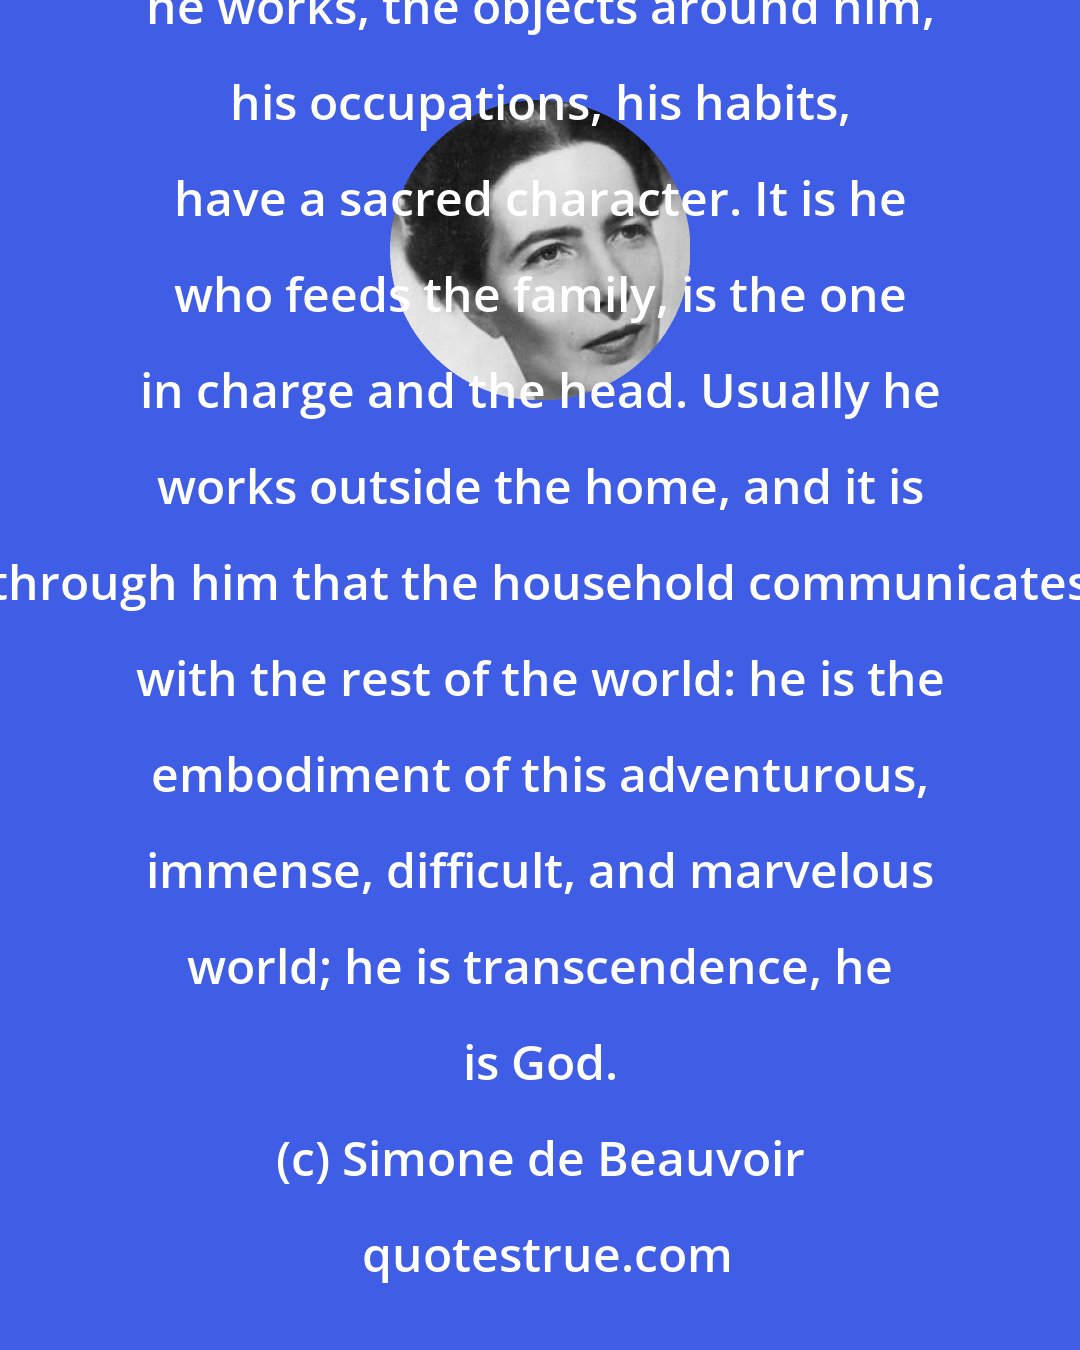 Simone de Beauvoir: The father's life is surrounded by mysterious prestige: the hours he spends in the home, the room where he works, the objects around him, his occupations, his habits, have a sacred character. It is he who feeds the family, is the one in charge and the head. Usually he works outside the home, and it is through him that the household communicates with the rest of the world: he is the embodiment of this adventurous, immense, difficult, and marvelous world; he is transcendence, he is God.